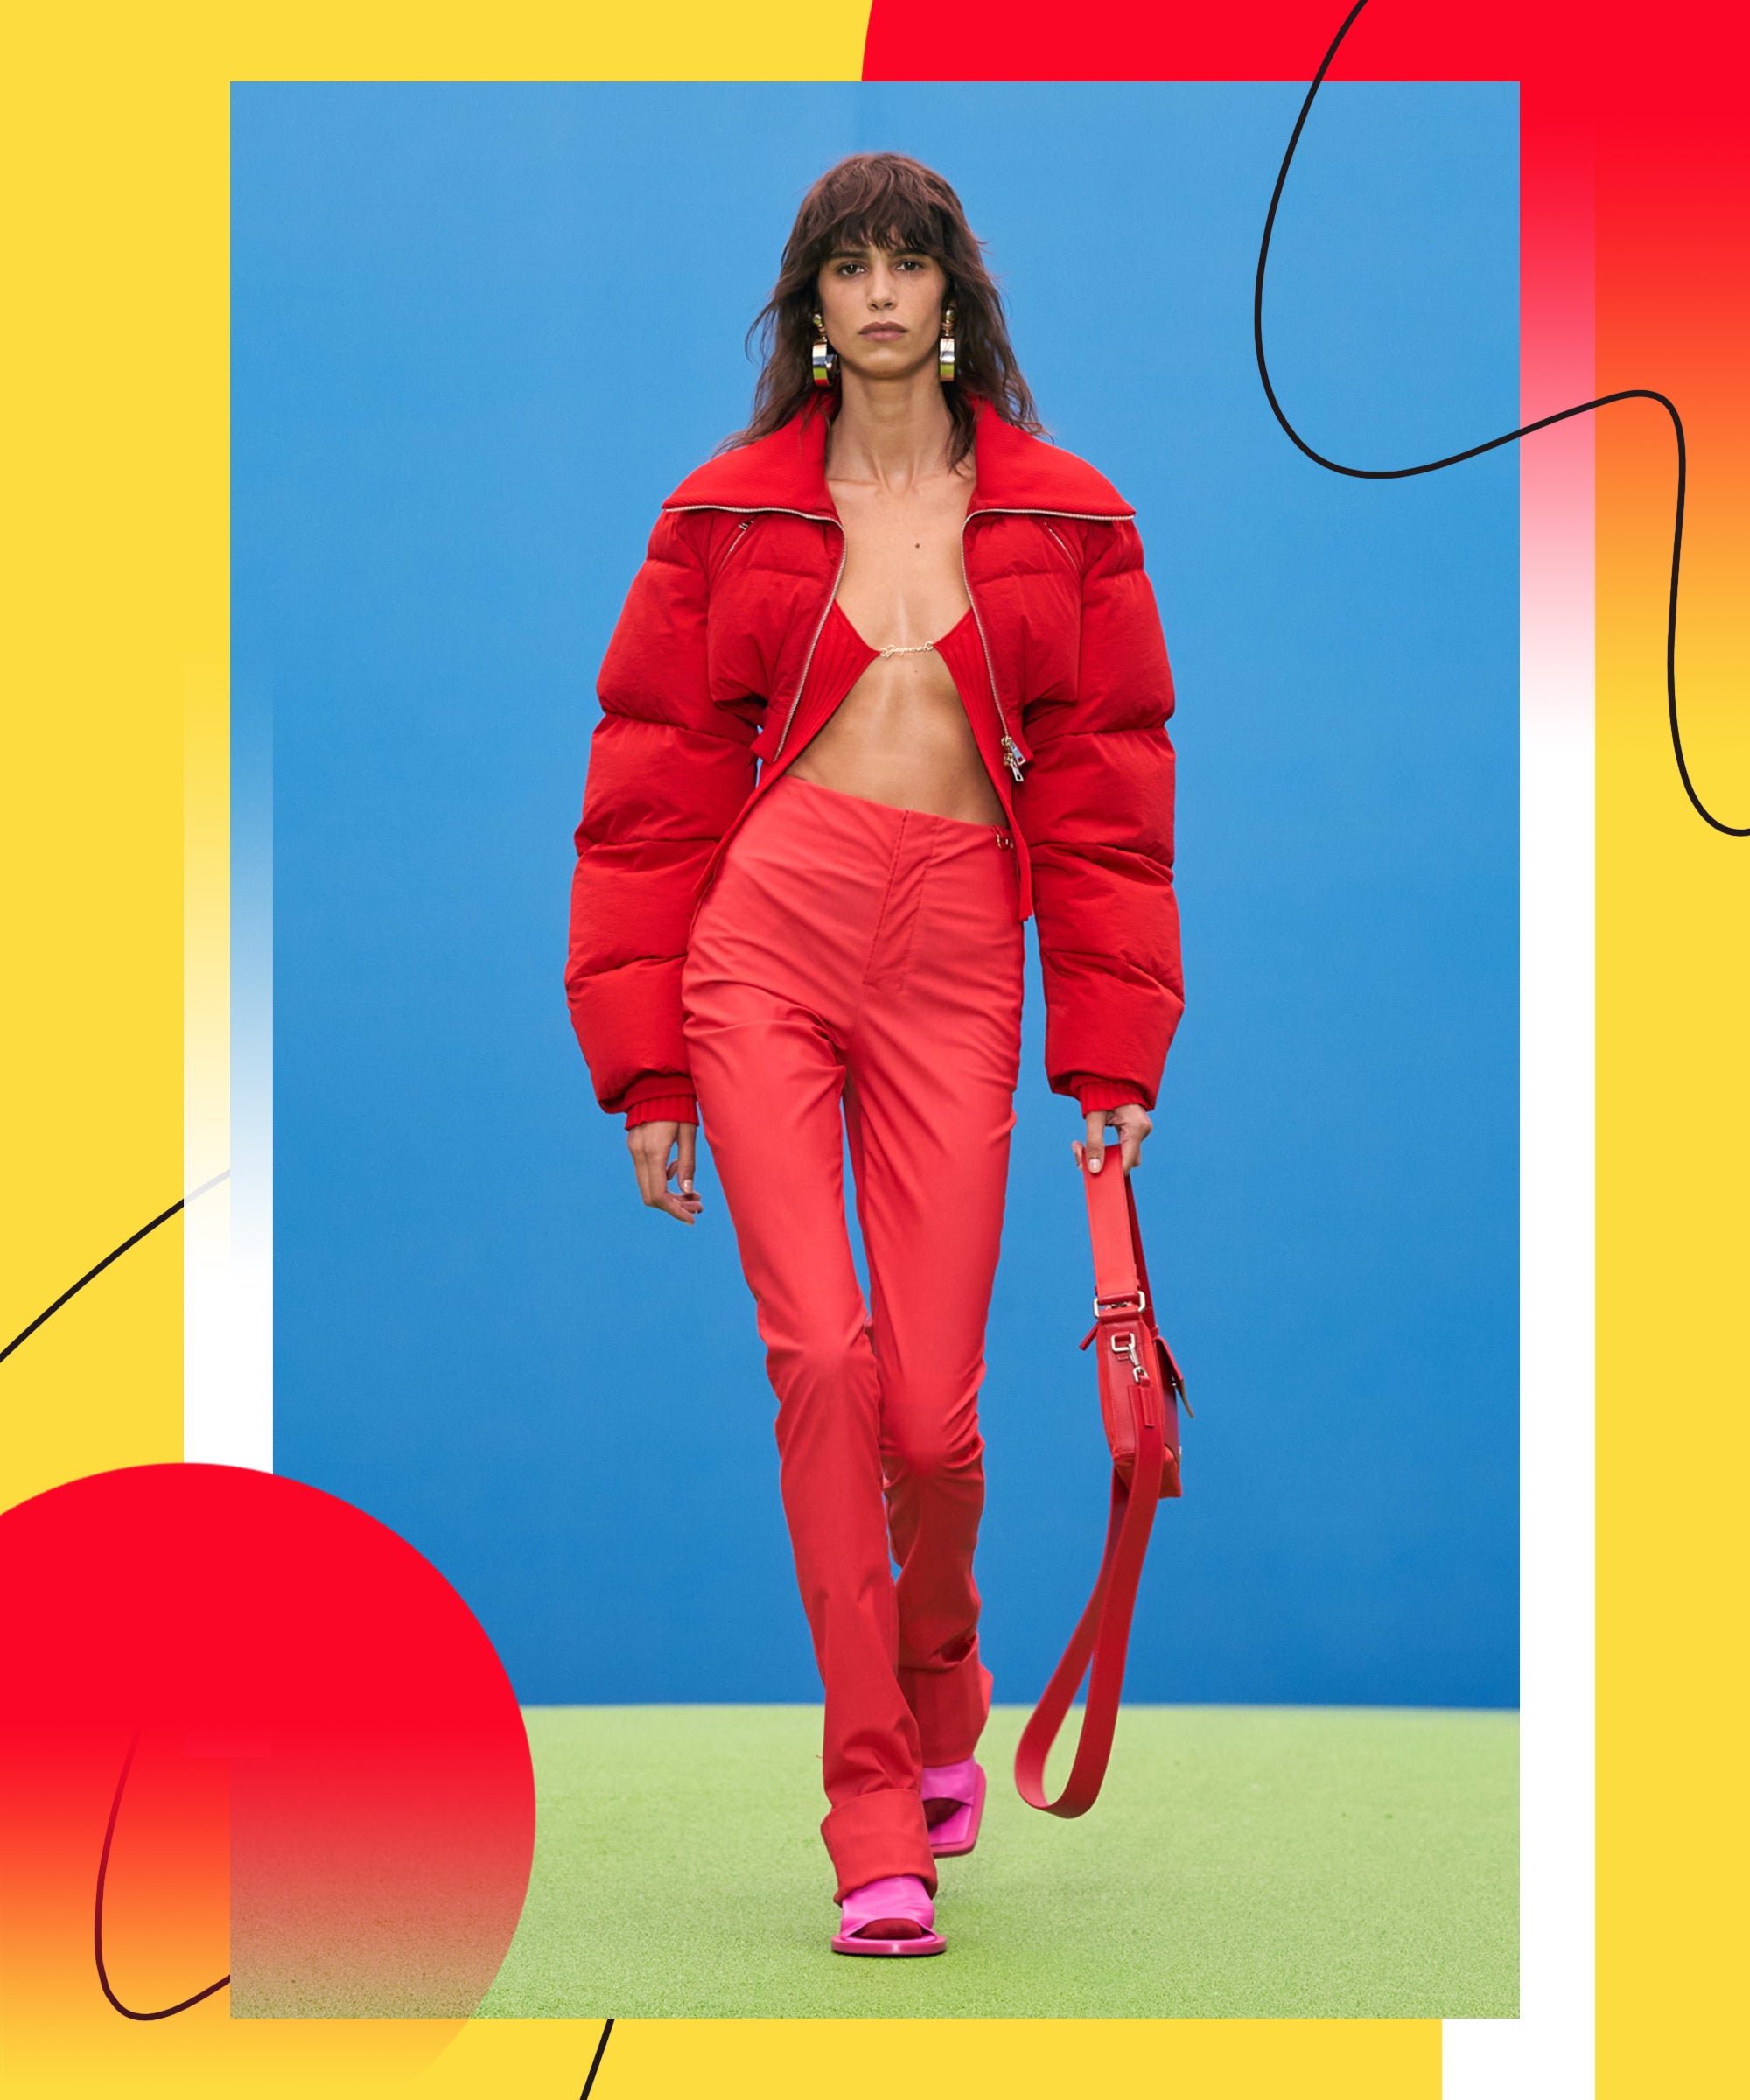 Fall 2021 fashion trends to try now: Bold color, elevated knits